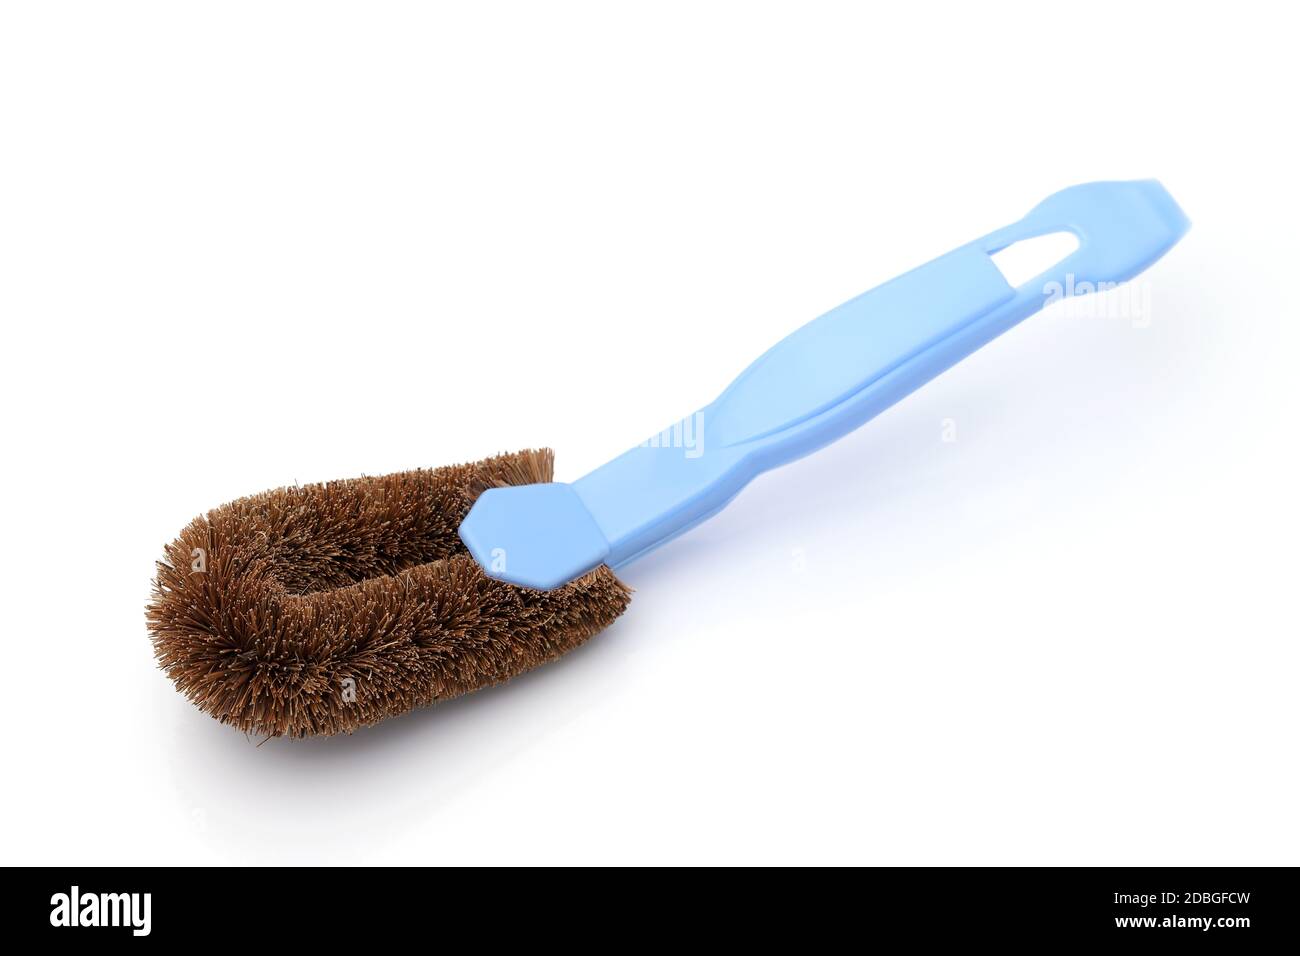 Coconut coir fiber scrubbing brush with handle on white background Stock Photo